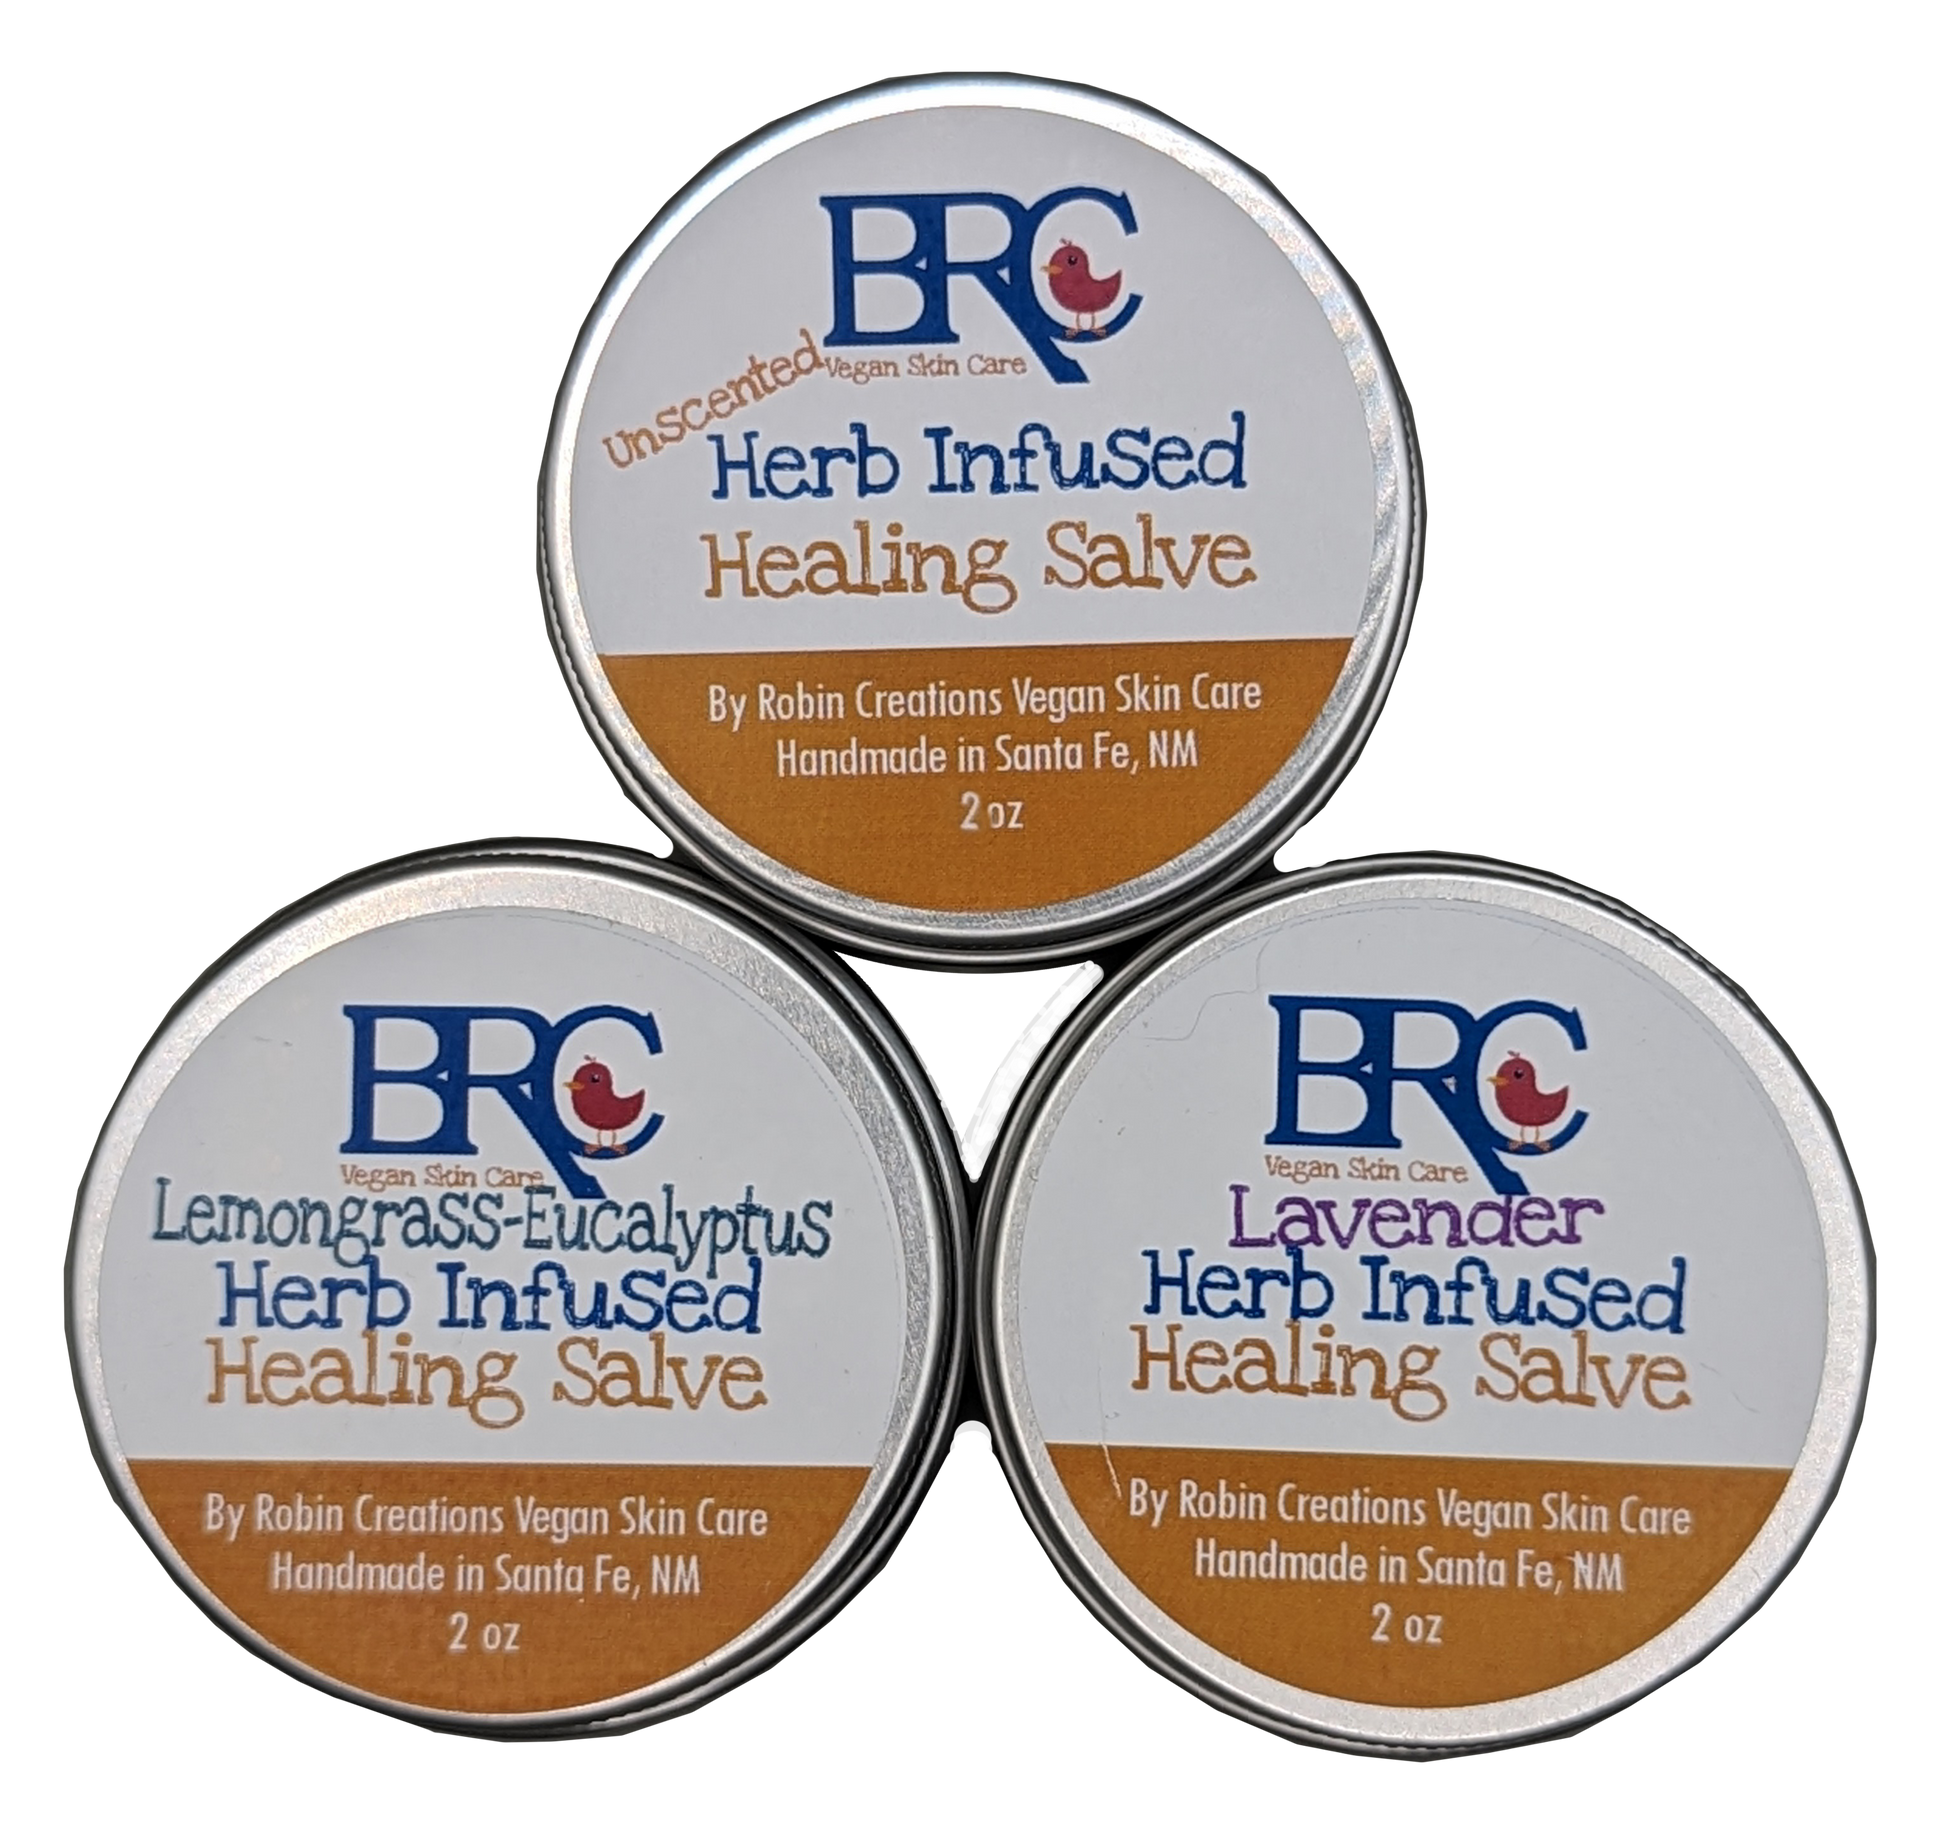 Herb-Infused Healing Salve - First Aid Balm | By Robin Creations 